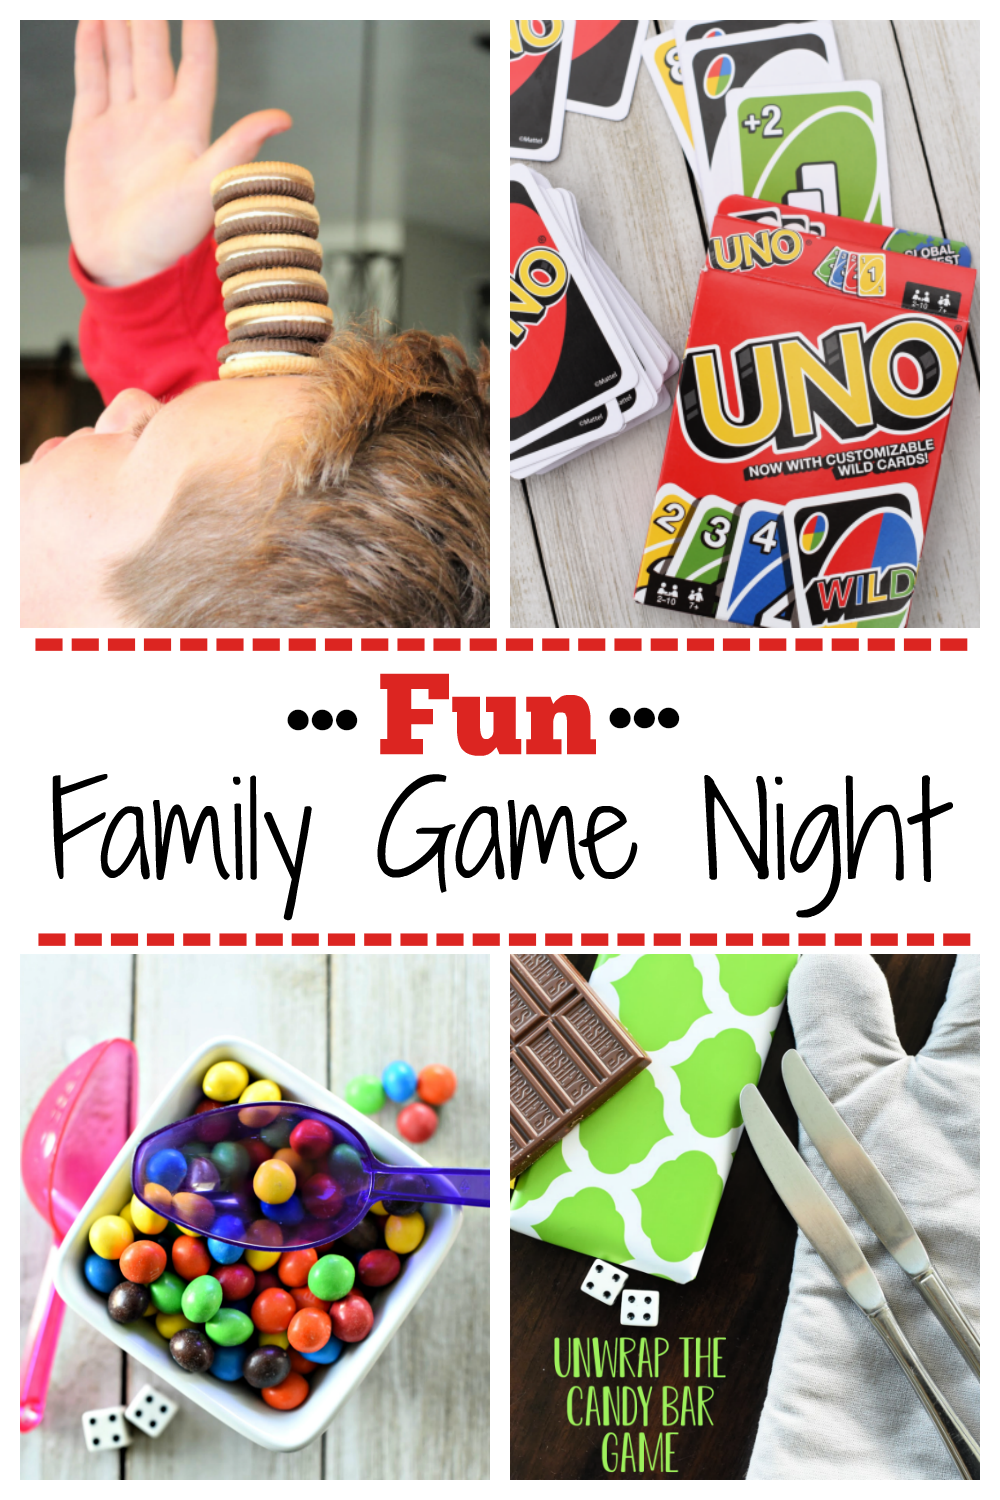 Family Game Night Ideas. We have lots of fun ideas for your next family game night. So many simple ideas, your family will love playing them. #familygamenight #gamenight #familygames #funboardgames #fungames #games